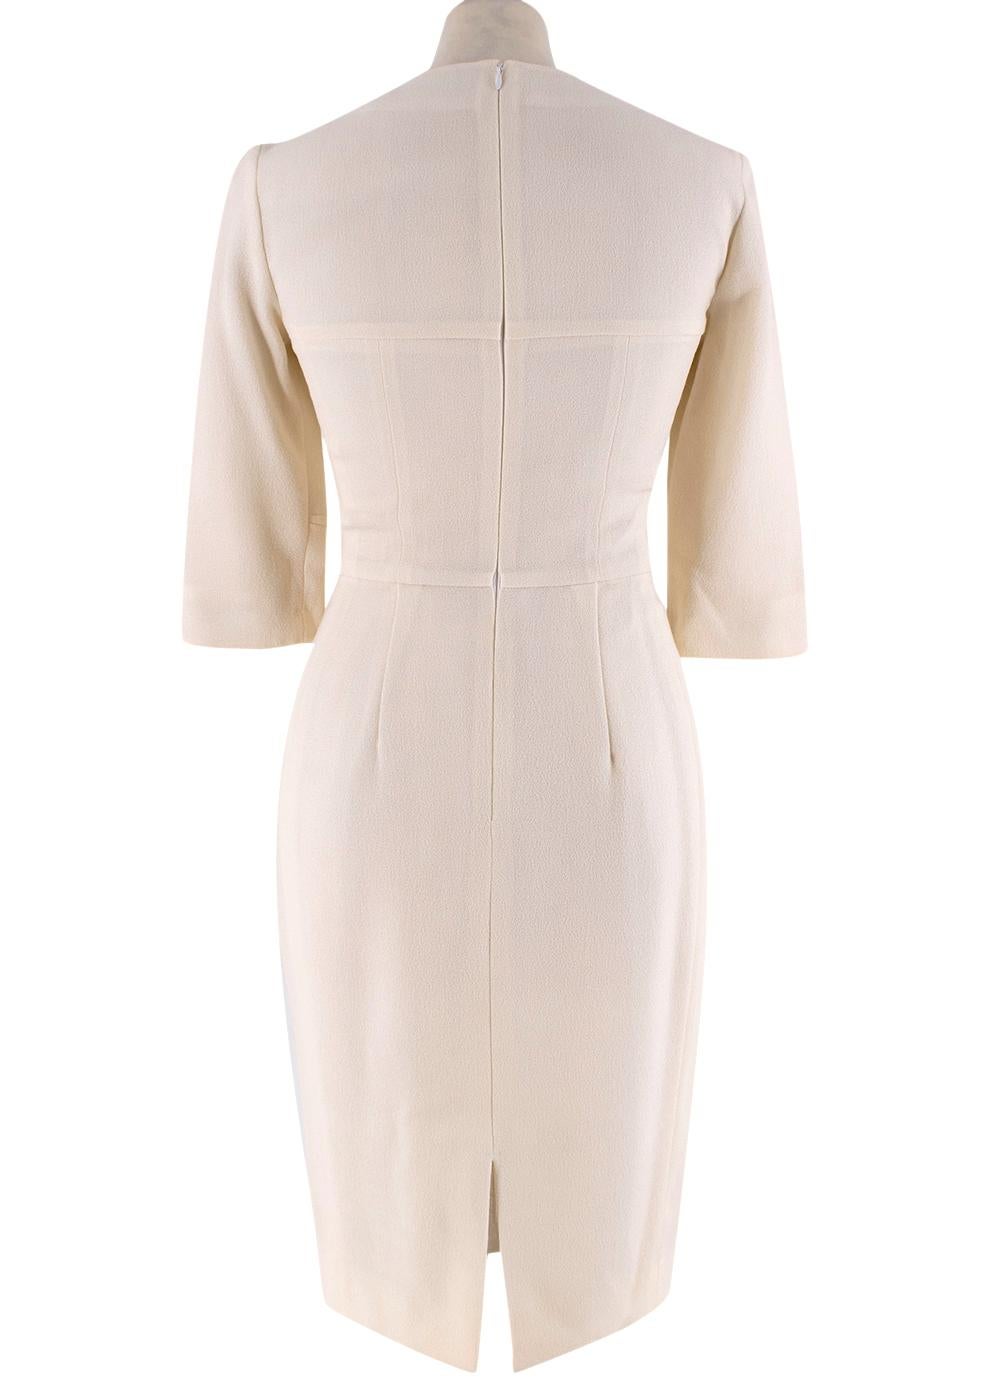 Yves Saint Laurent Cream Fitted Dress

- Textured silk
- Knee length skirt
- Quarter length sleeves
- Round neck fastening
- Accentuated waist

Made in France

Fabric Composition:
Silk Blend

THERE IS NO SIZE /CARE LABEL, HOWEVER BASED ON THE VIP